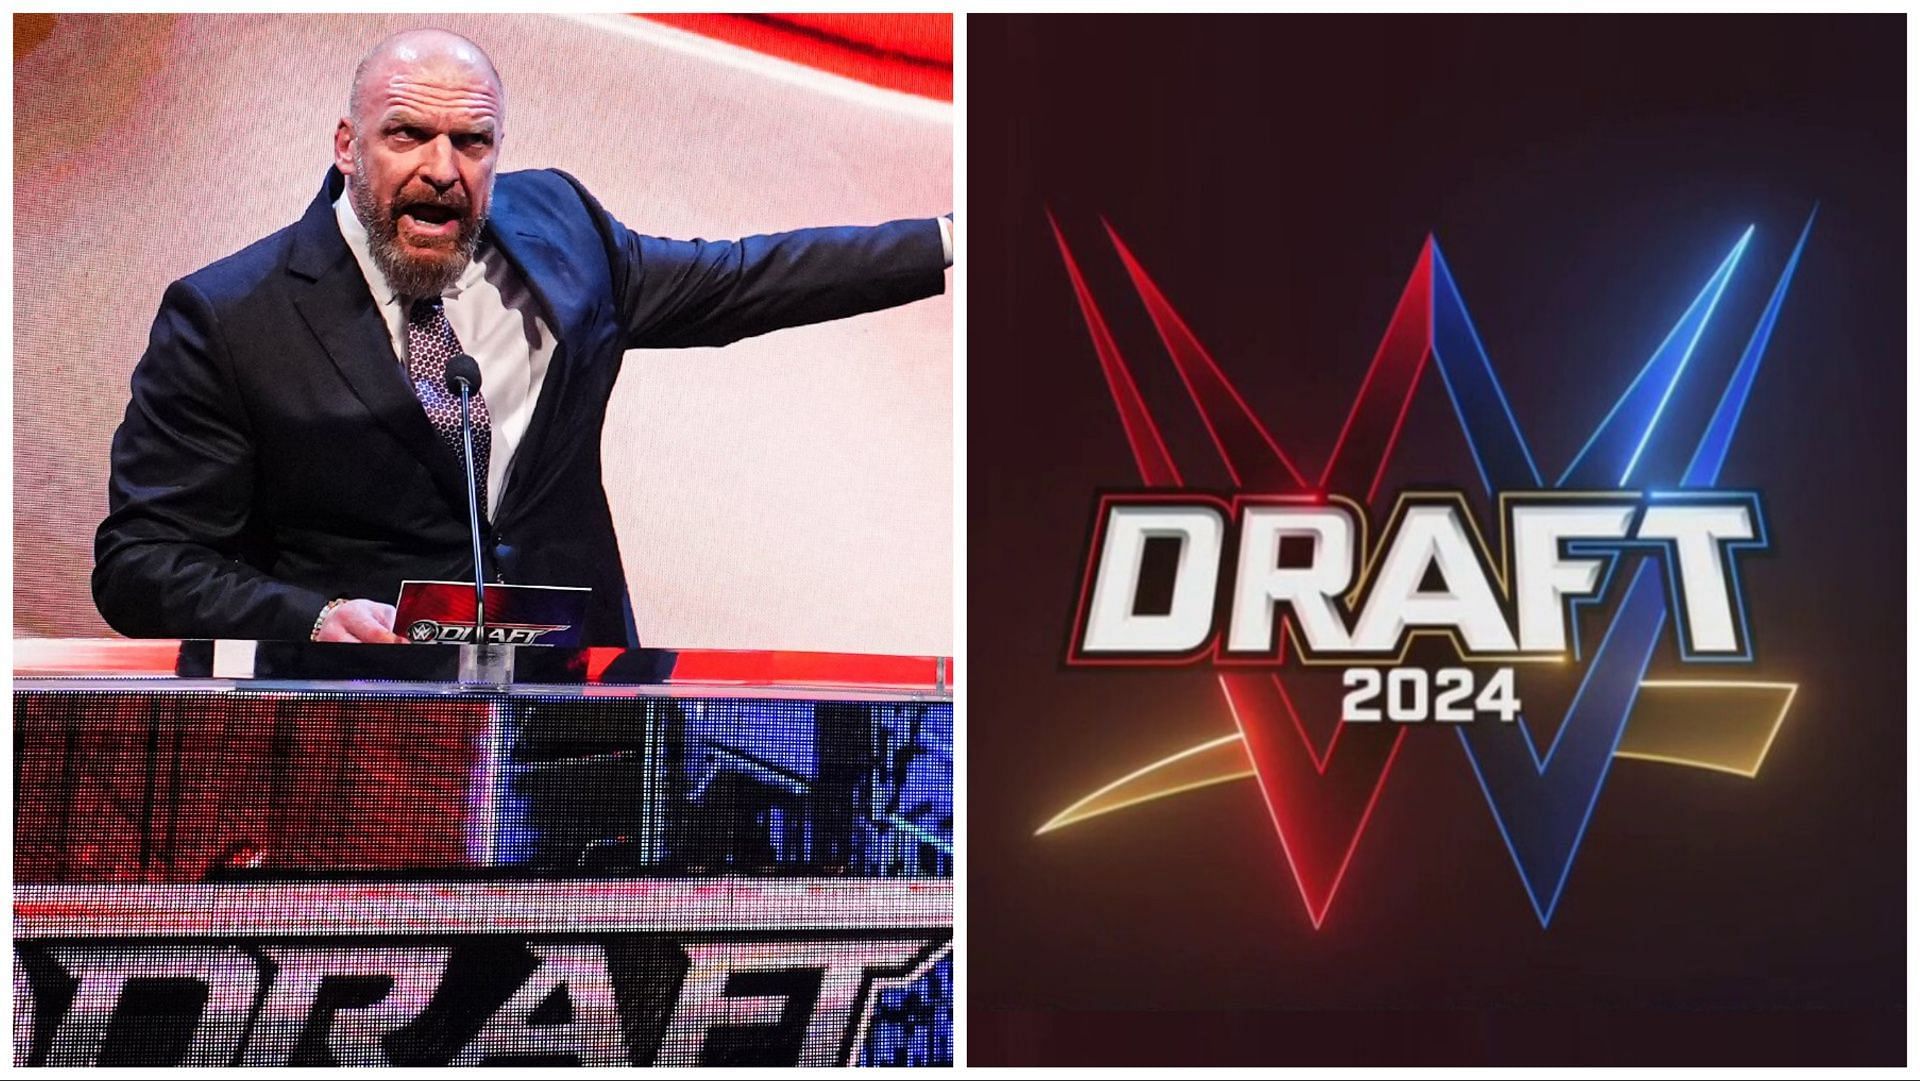 Triple H hosts the WWE Draft, the official logo for the 2024 Draft